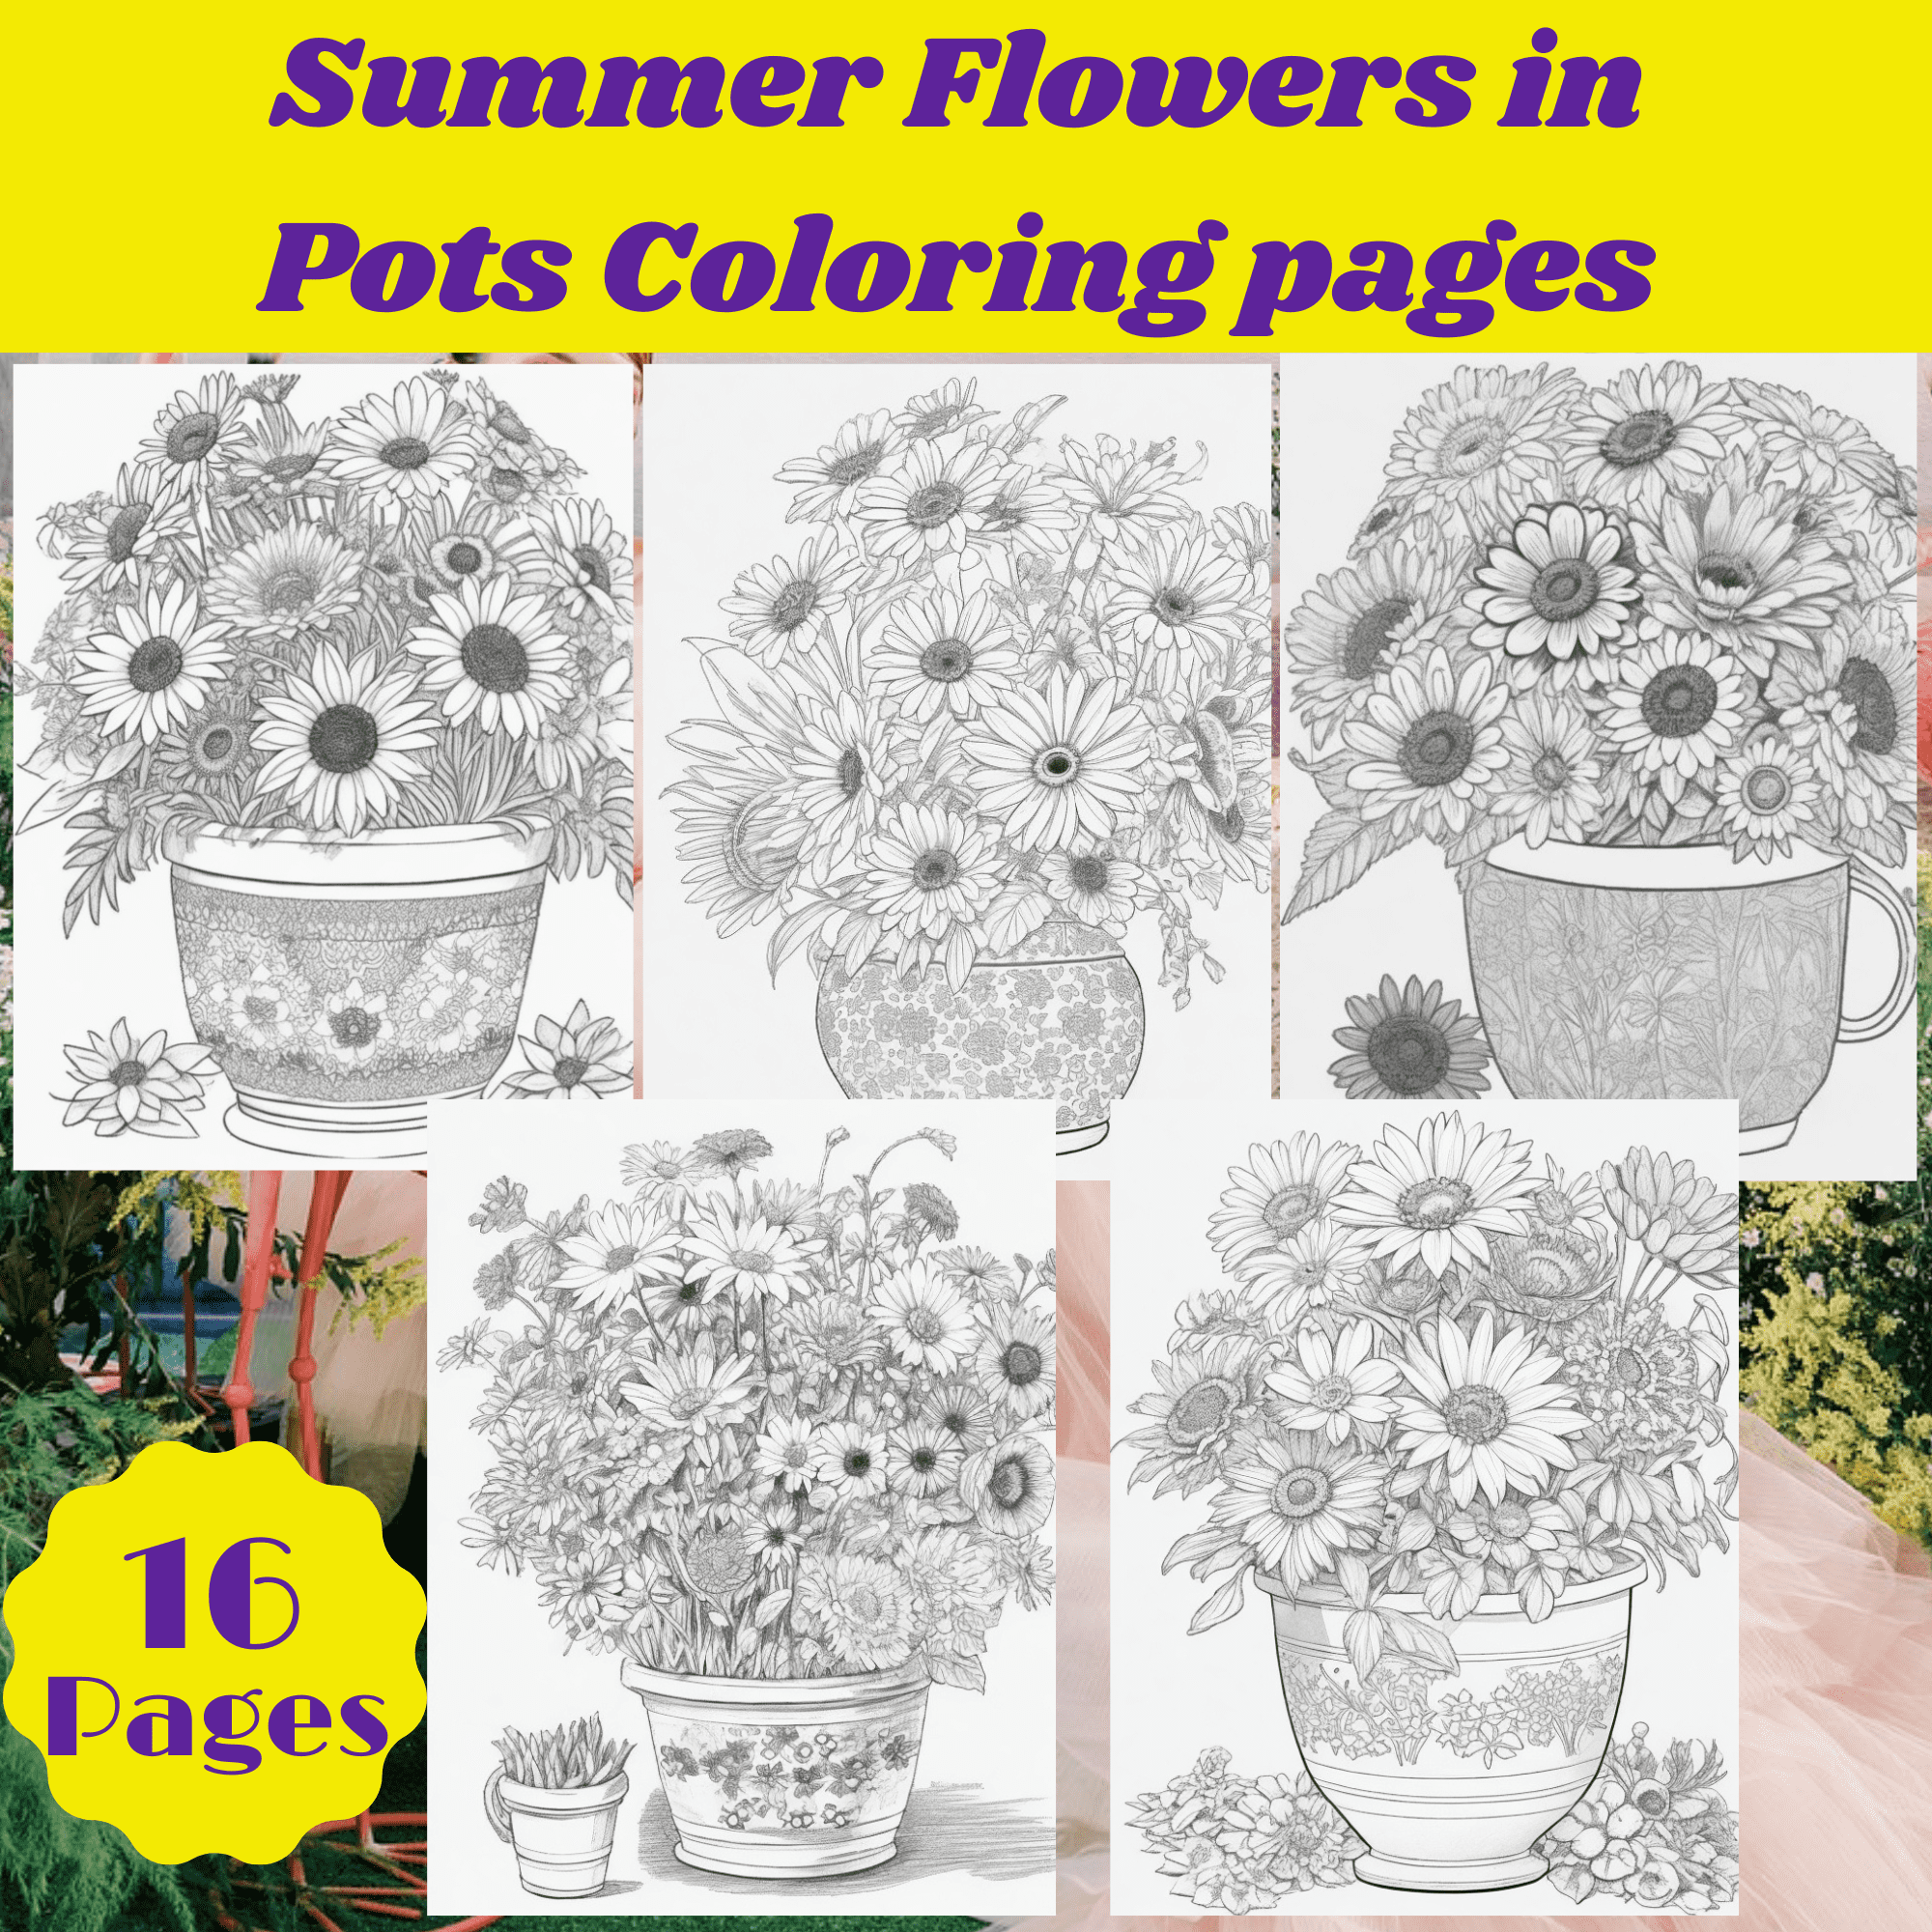 Summer flowers in pots coloring pages made by teachers